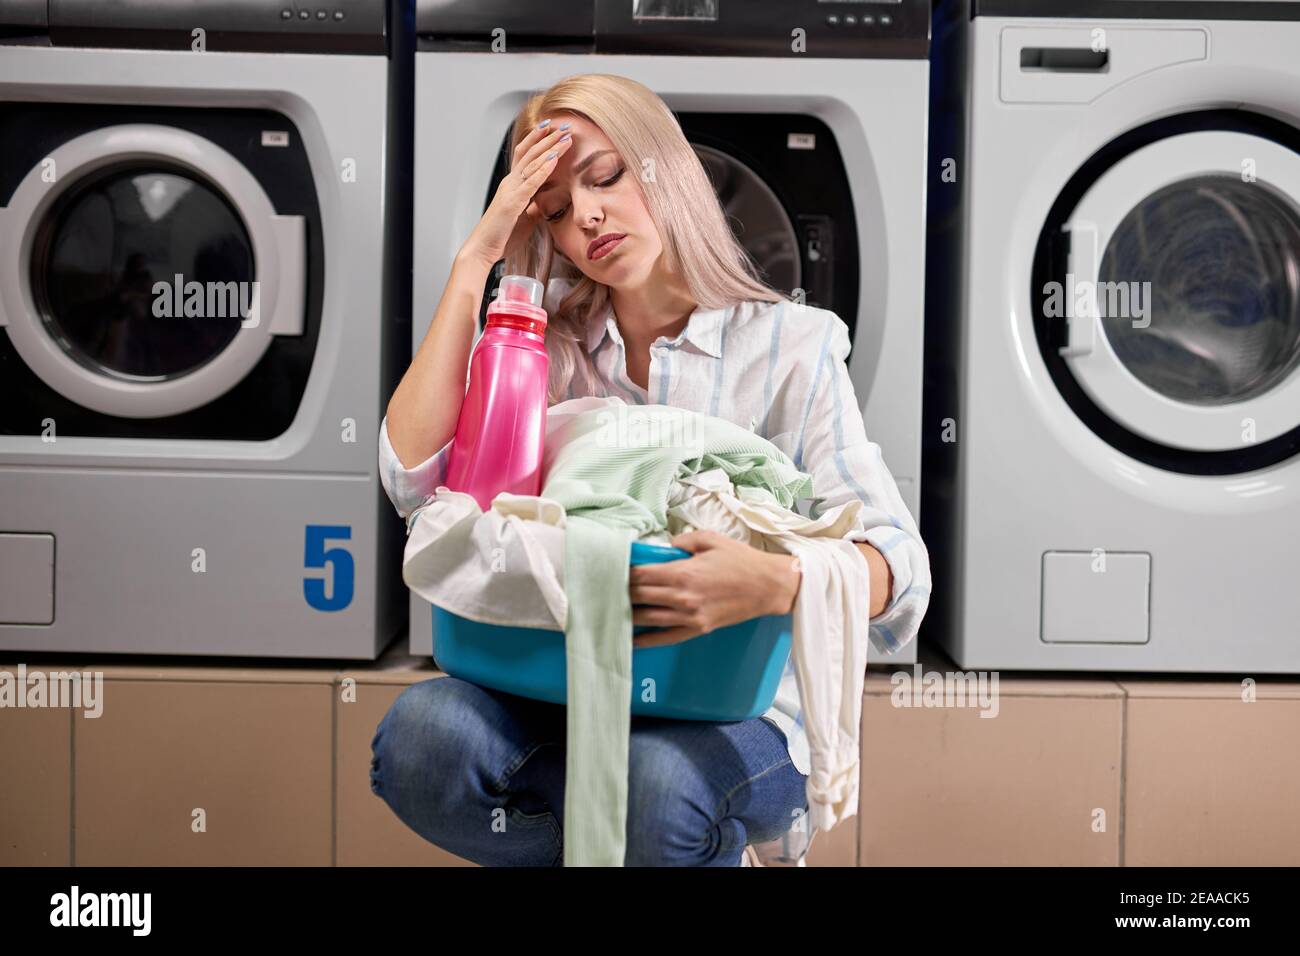 woman doing laundry, looking sad and depressed expression, having bad mood after hard working day, in washing house. tired and exhausted staff Stock Photo